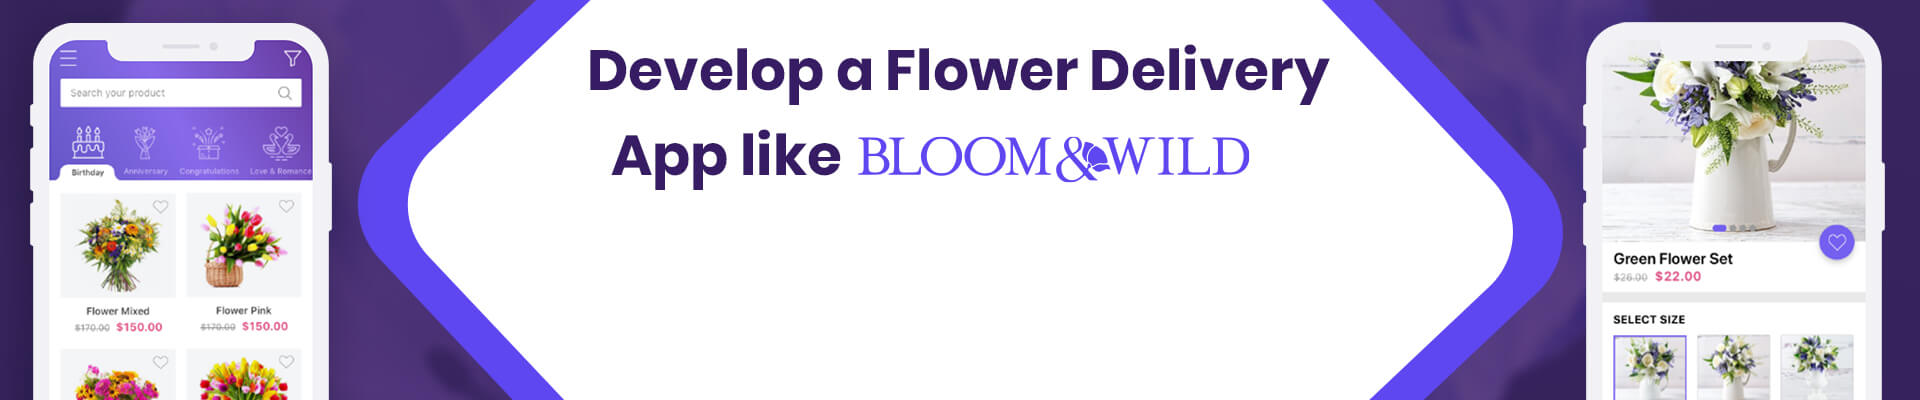 How to Develop a Flower Delivery App like Bloom and Wild? [2021-2022]